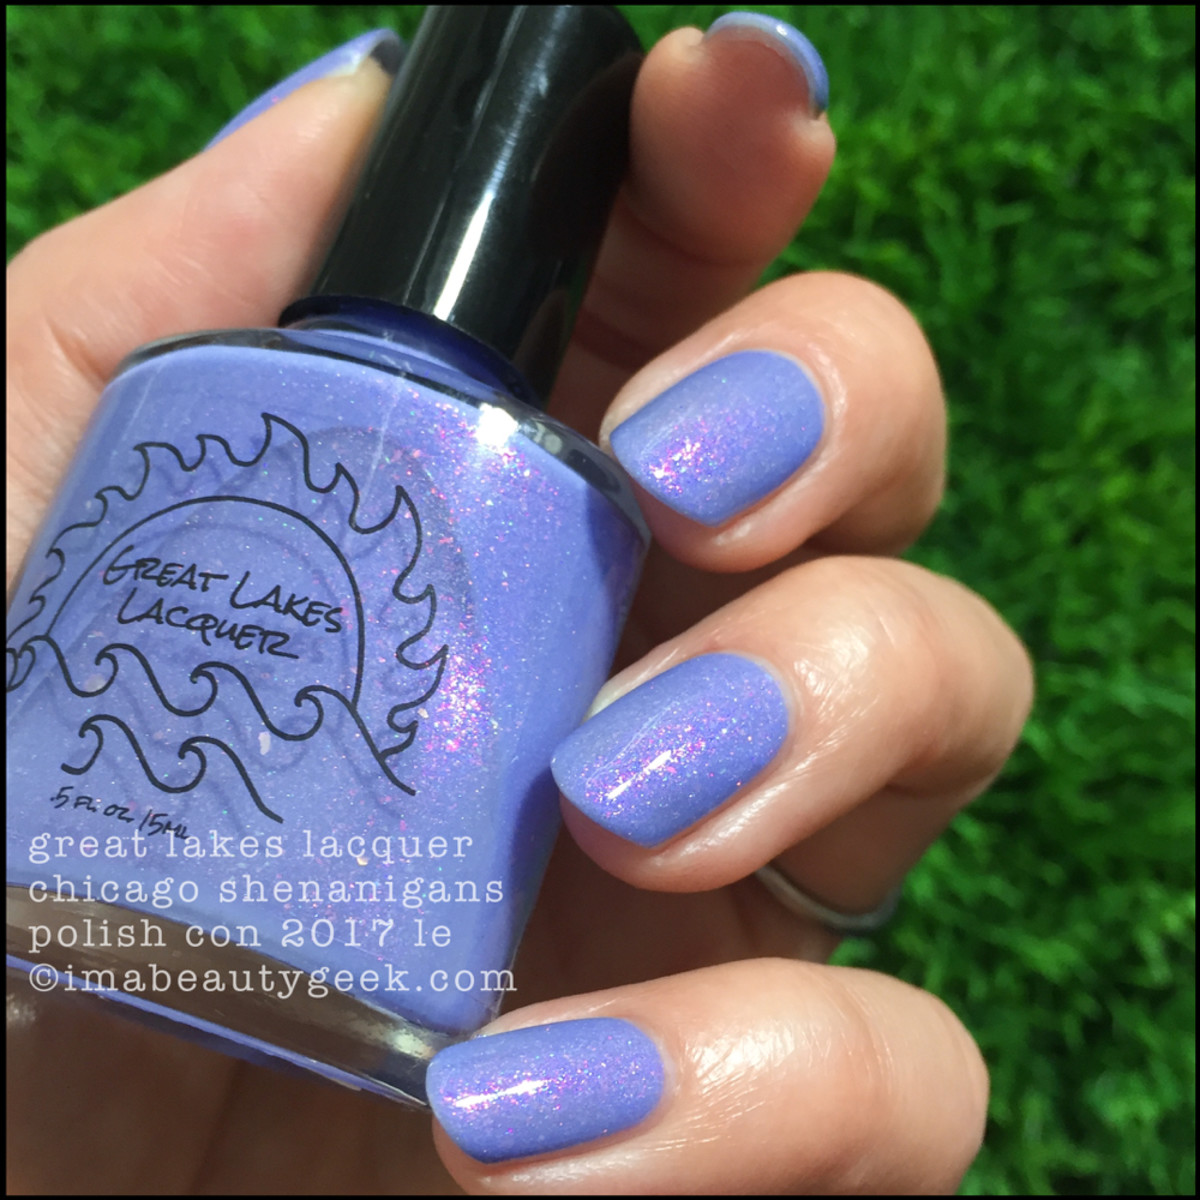 Great Lakes Lacquer Chicago Shenanigans 2 _ Great Lakes Lacquer Polish Con 2017 Limited Editions